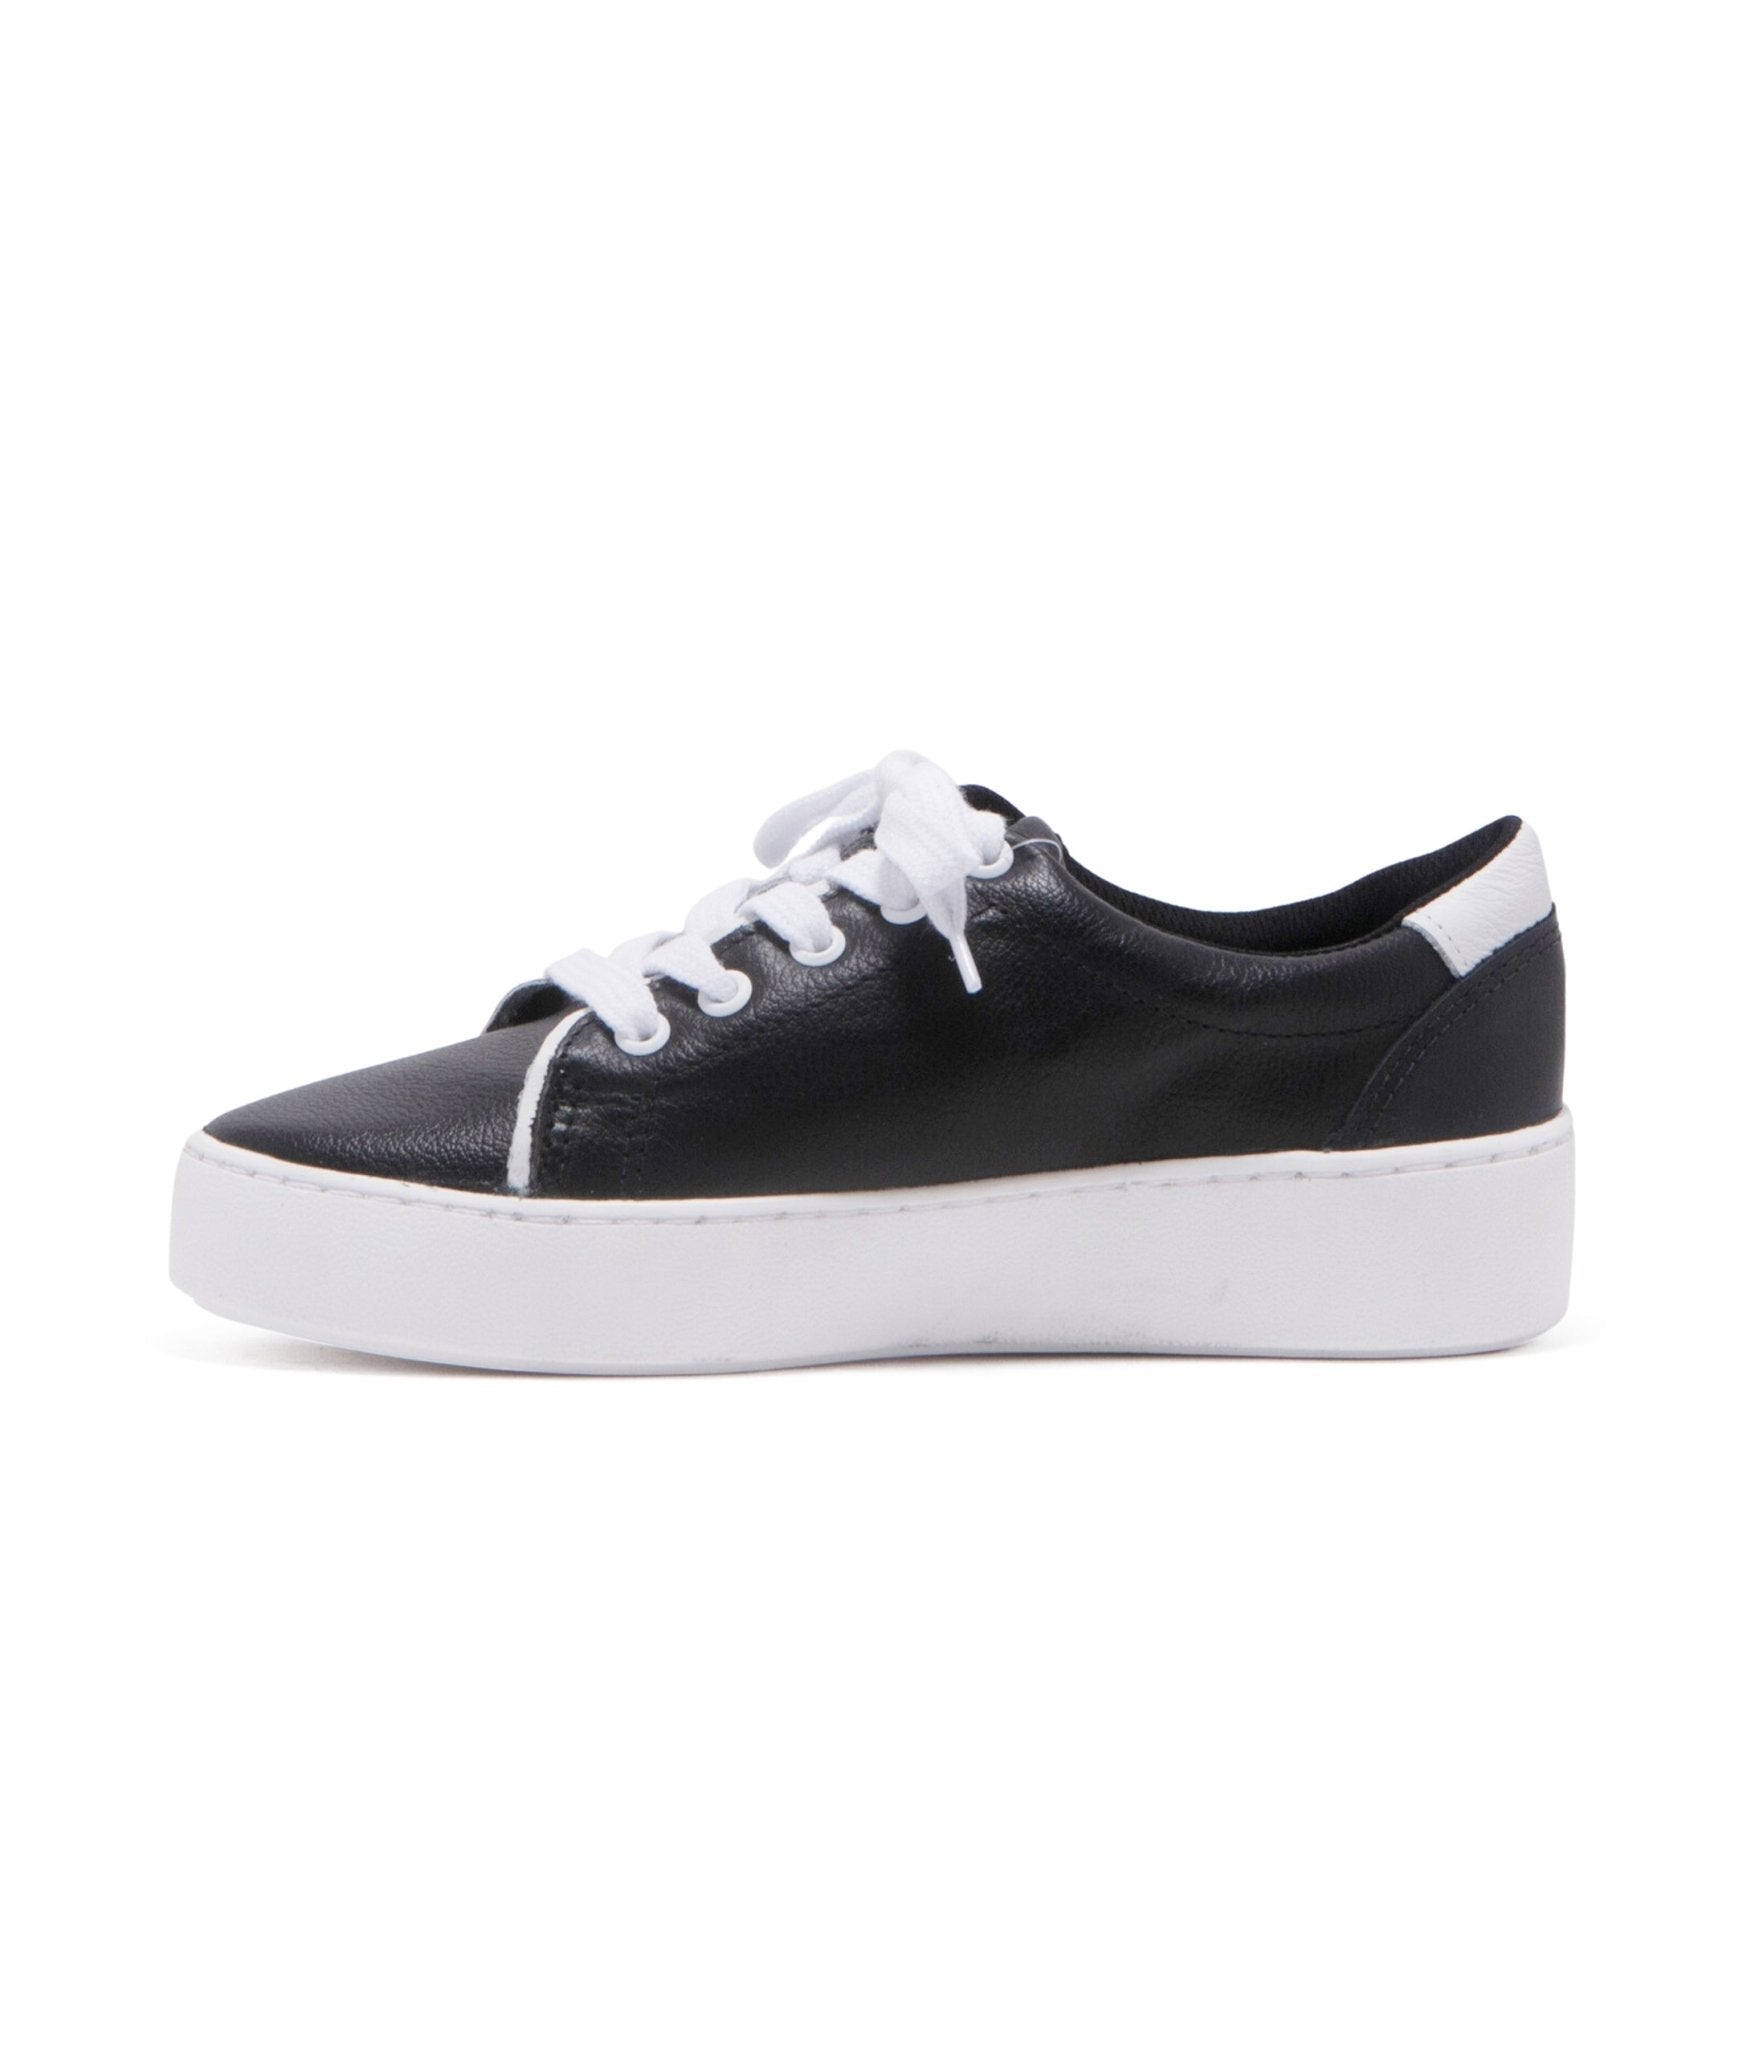 Chelsea Crew Black & White Leather Uganda Sneakers - Unique Vintage - Womens, SHOES, SNEAKERS